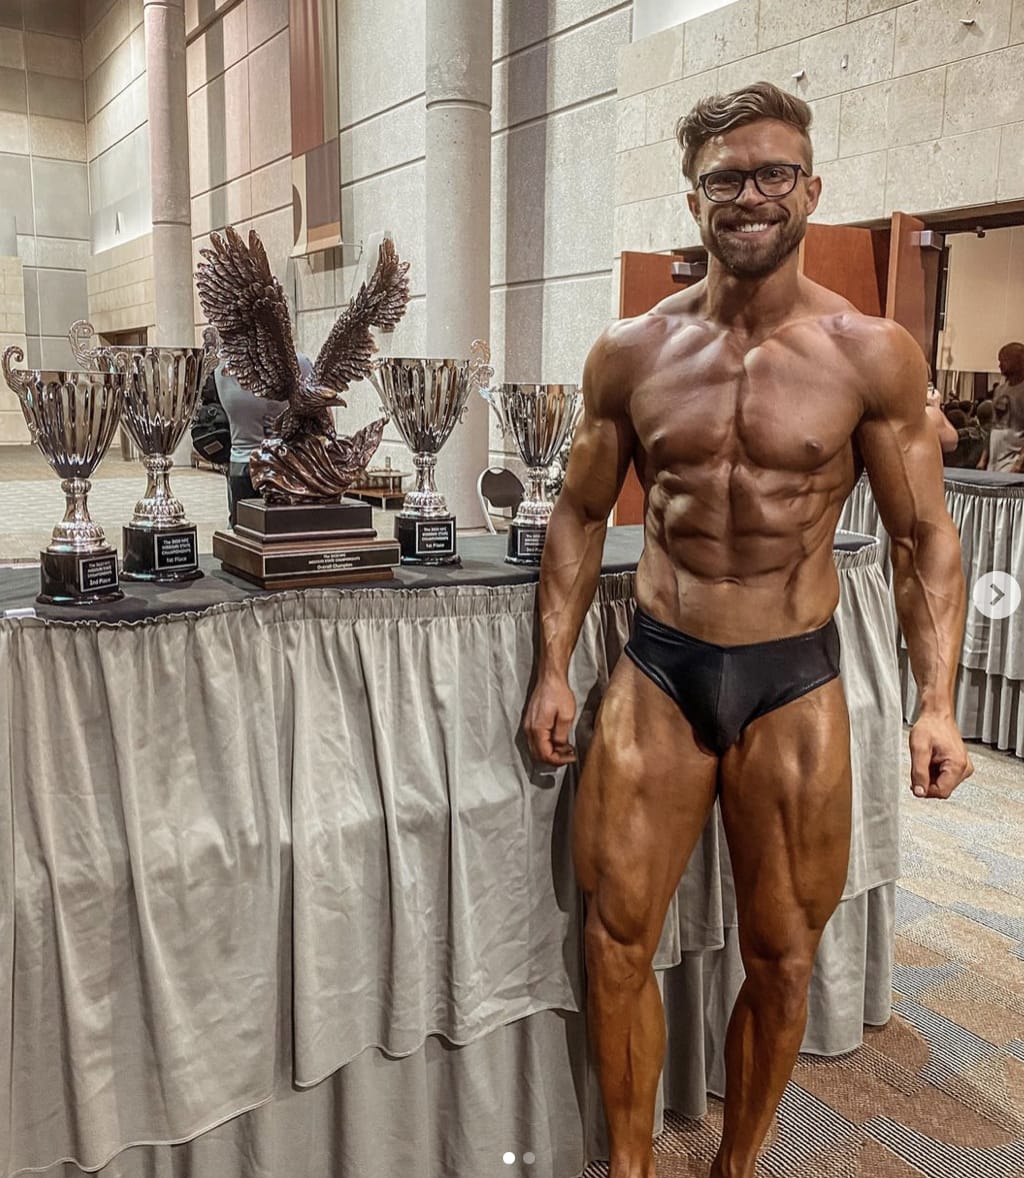 Will at a body building competition